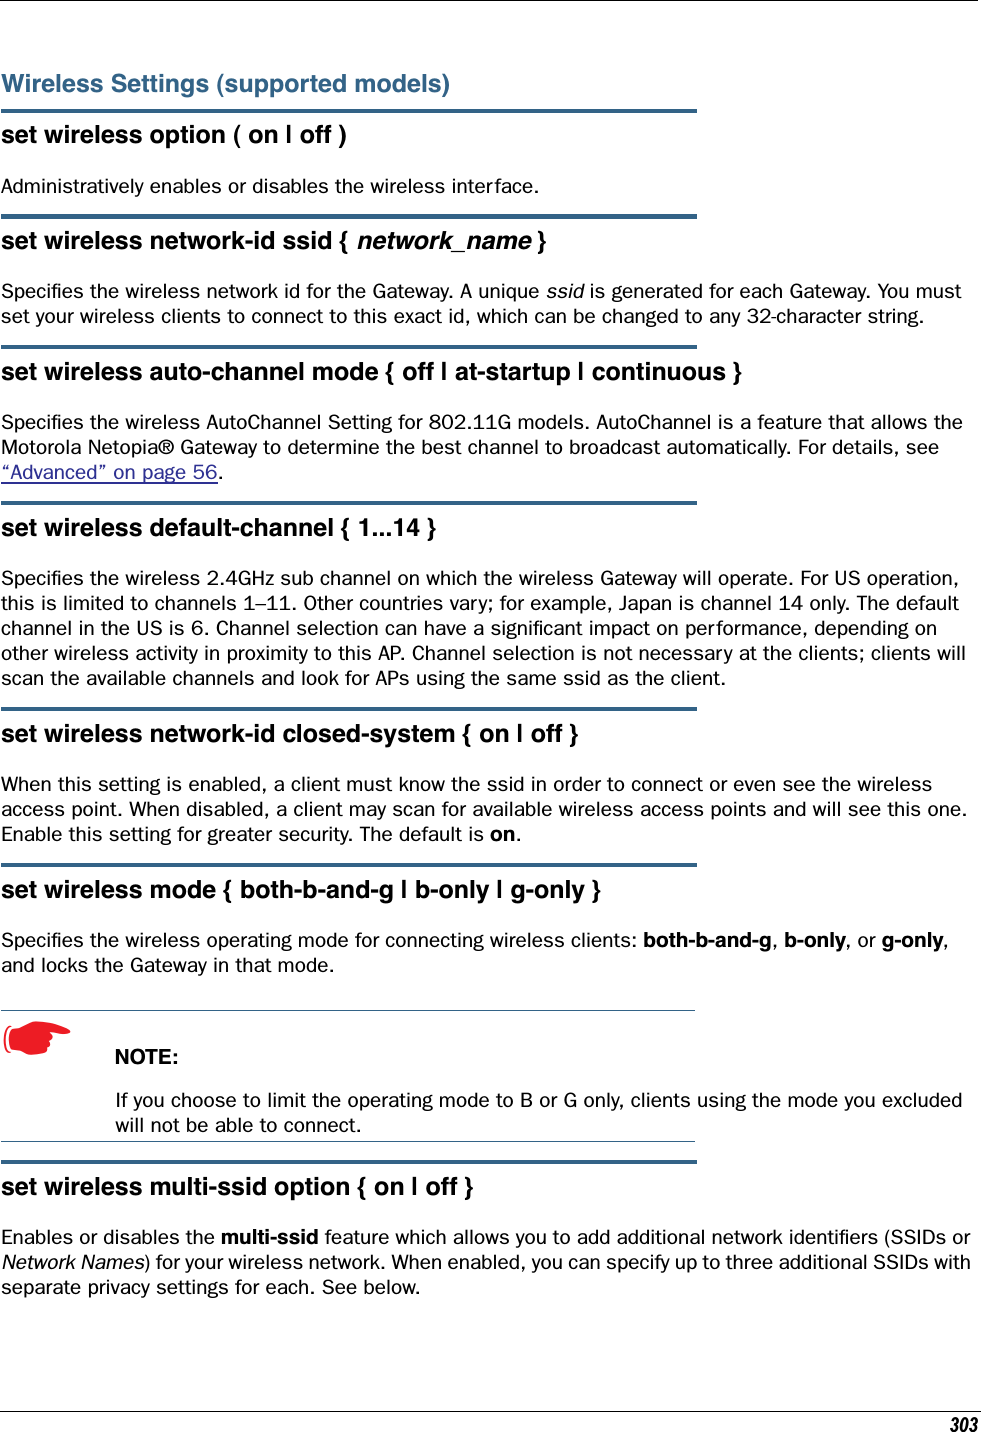 303Wireless Settings (supported models)set wireless option ( on | off )Administratively enables or disables the wireless interface.set wireless network-id ssid { network_name }Speciﬁes the wireless network id for the Gateway. A unique ssid is generated for each Gateway. You must set your wireless clients to connect to this exact id, which can be changed to any 32-character string.set wireless auto-channel mode { off | at-startup | continuous }Speciﬁes the wireless AutoChannel Setting for 802.11G models. AutoChannel is a feature that allows the Motorola Netopia® Gateway to determine the best channel to broadcast automatically. For details, see “Advanced” on page 56.set wireless default-channel { 1...14 }Speciﬁes the wireless 2.4GHz sub channel on which the wireless Gateway will operate. For US operation, this is limited to channels 1–11. Other countries vary; for example, Japan is channel 14 only. The default channel in the US is 6. Channel selection can have a signiﬁcant impact on performance, depending on other wireless activity in proximity to this AP. Channel selection is not necessary at the clients; clients will scan the available channels and look for APs using the same ssid as the client.set wireless network-id closed-system { on | off }When this setting is enabled, a client must know the ssid in order to connect or even see the wireless access point. When disabled, a client may scan for available wireless access points and will see this one. Enable this setting for greater security. The default is on.set wireless mode { both-b-and-g | b-only | g-only }Speciﬁes the wireless operating mode for connecting wireless clients: both-b-and-g, b-only, or g-only, and locks the Gateway in that mode.☛  NOTE:If you choose to limit the operating mode to B or G only, clients using the mode you excluded will not be able to connect.set wireless multi-ssid option { on | off }Enables or disables the multi-ssid feature which allows you to add additional network identiﬁers (SSIDs or Network Names) for your wireless network. When enabled, you can specify up to three additional SSIDs with separate privacy settings for each. See below.